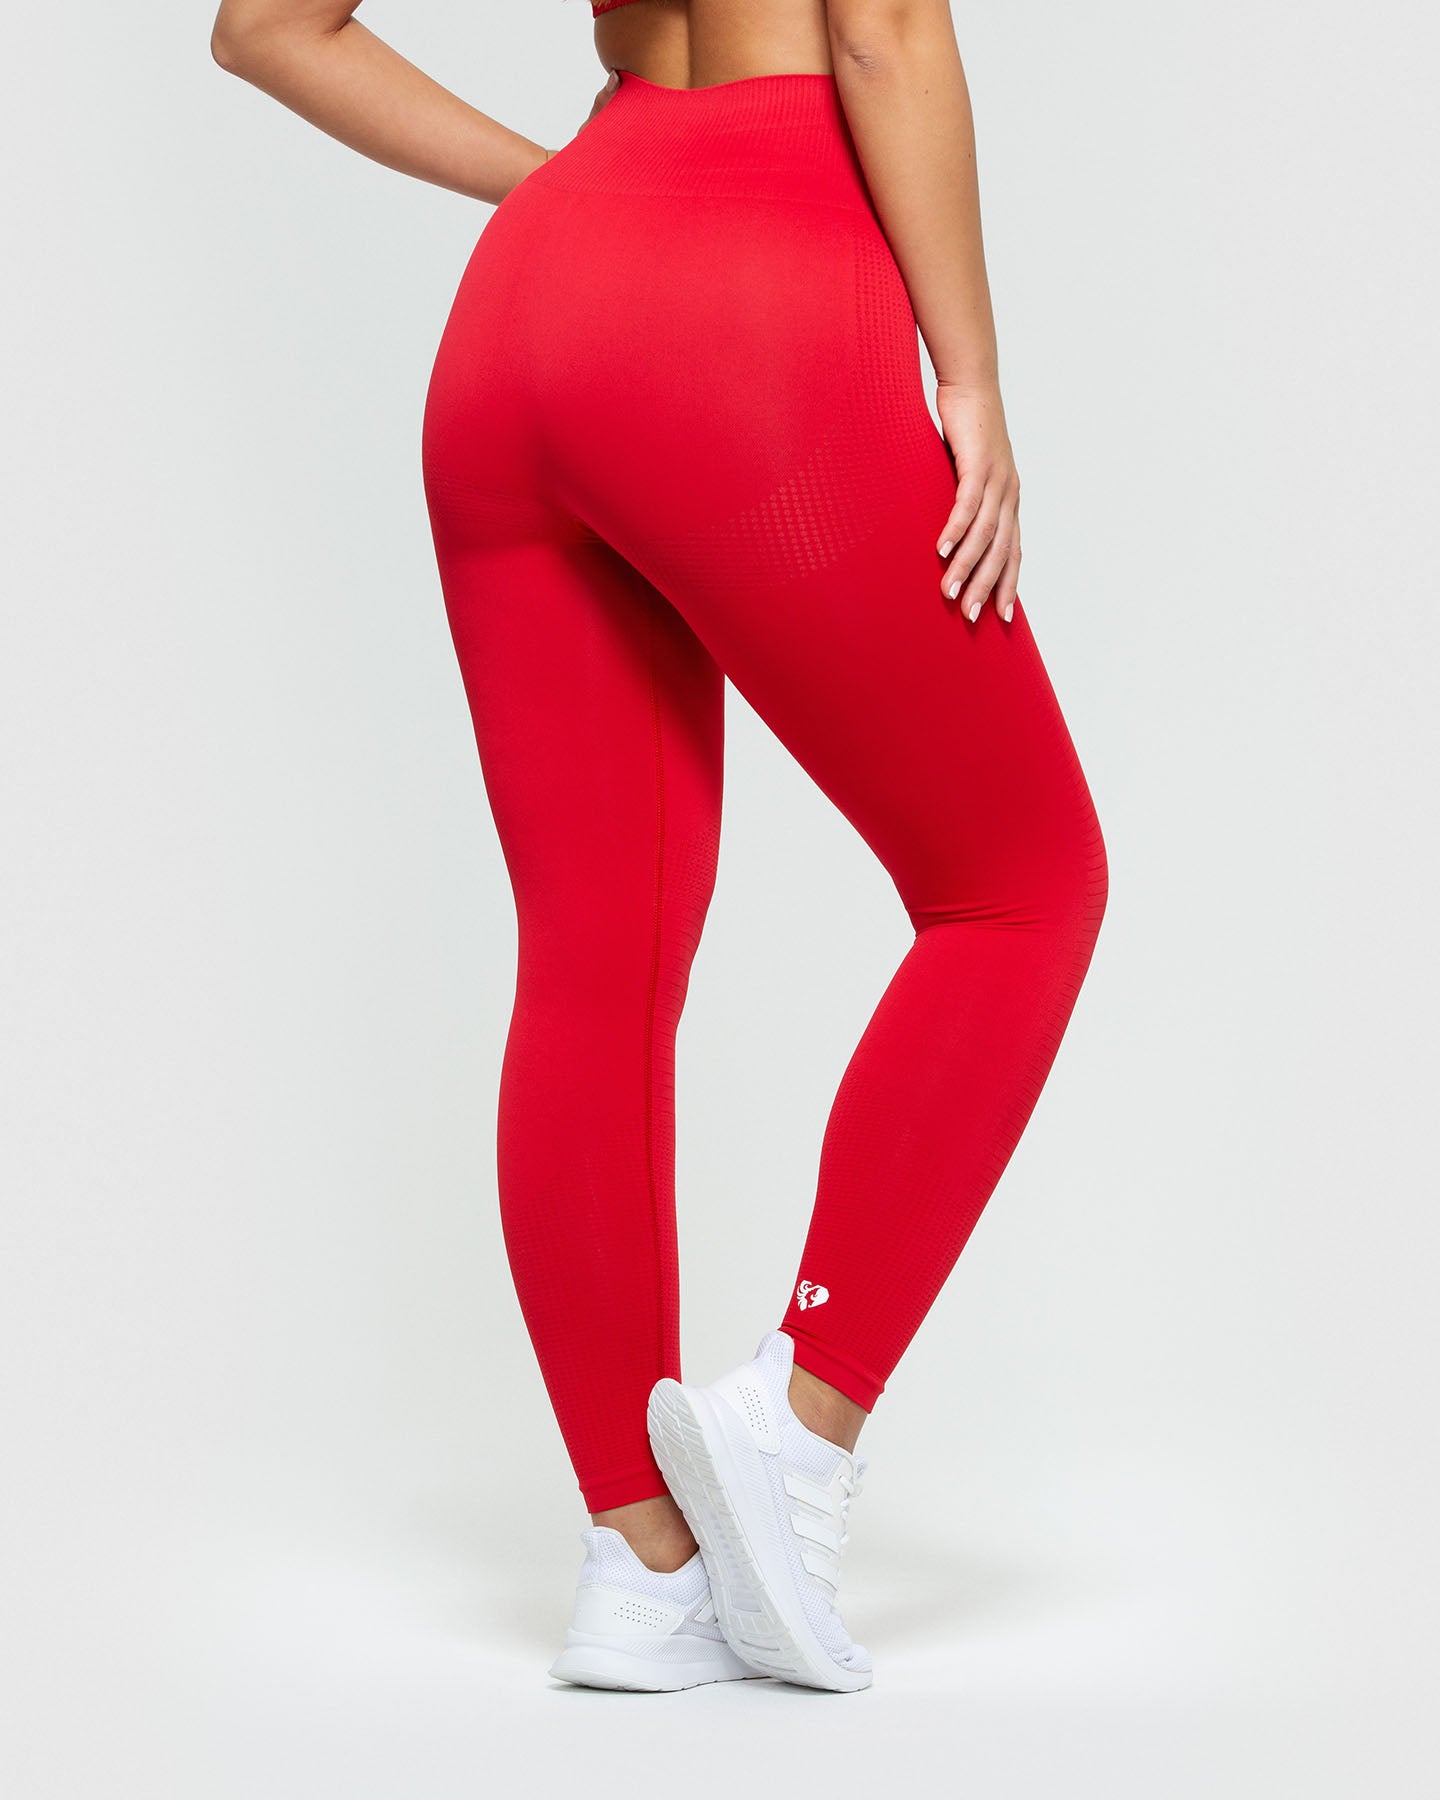 Leggings for Trendy Women with Active Lifestyle - Buy Online – BCLO STORE